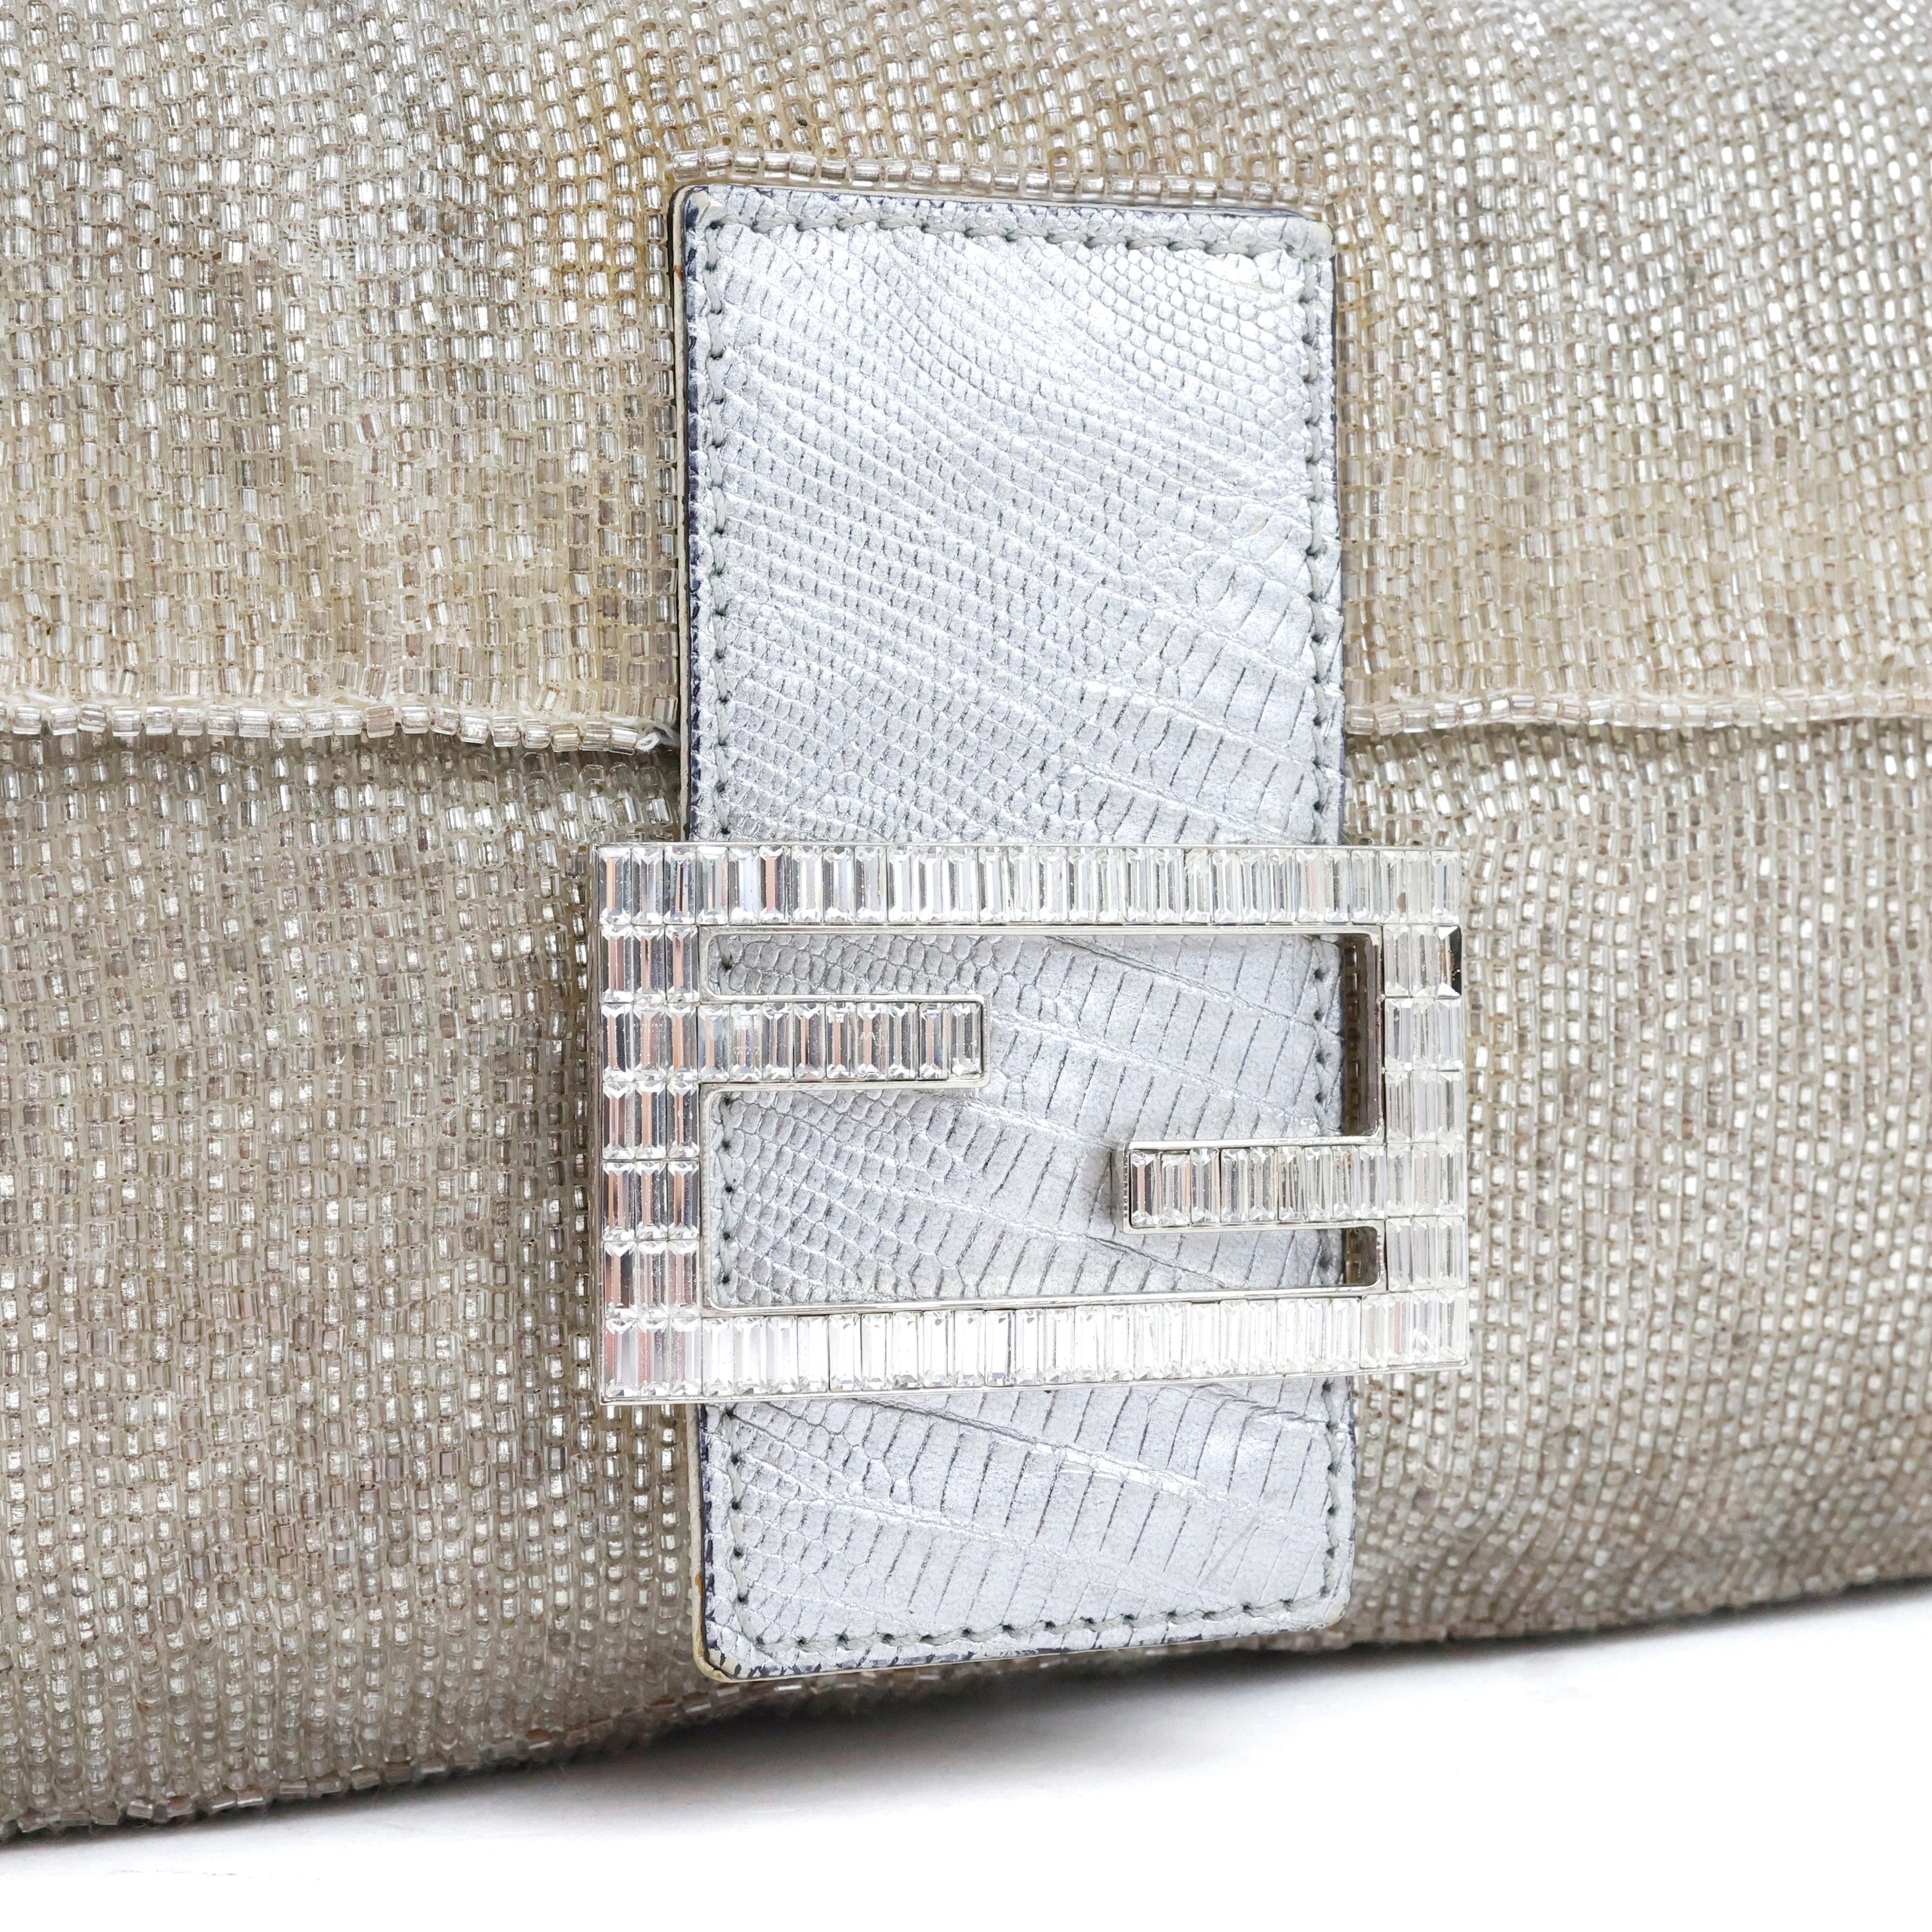 Rare Fendi Crystal Embellished Baguette with Lizard Leather In Good Condition For Sale In Bressanone, IT